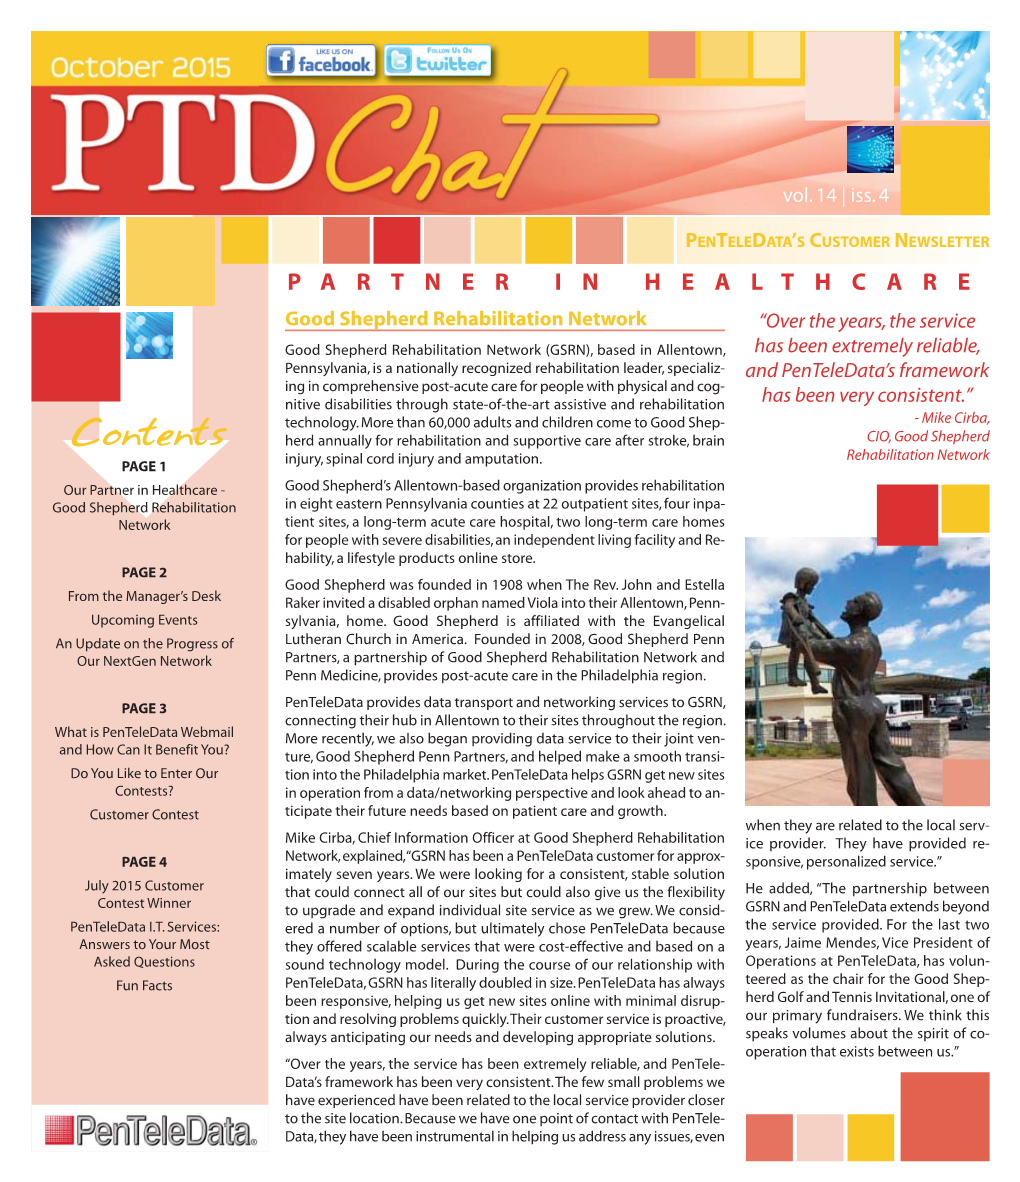 Ptdchat-Vol14iss4 Links Layout 1